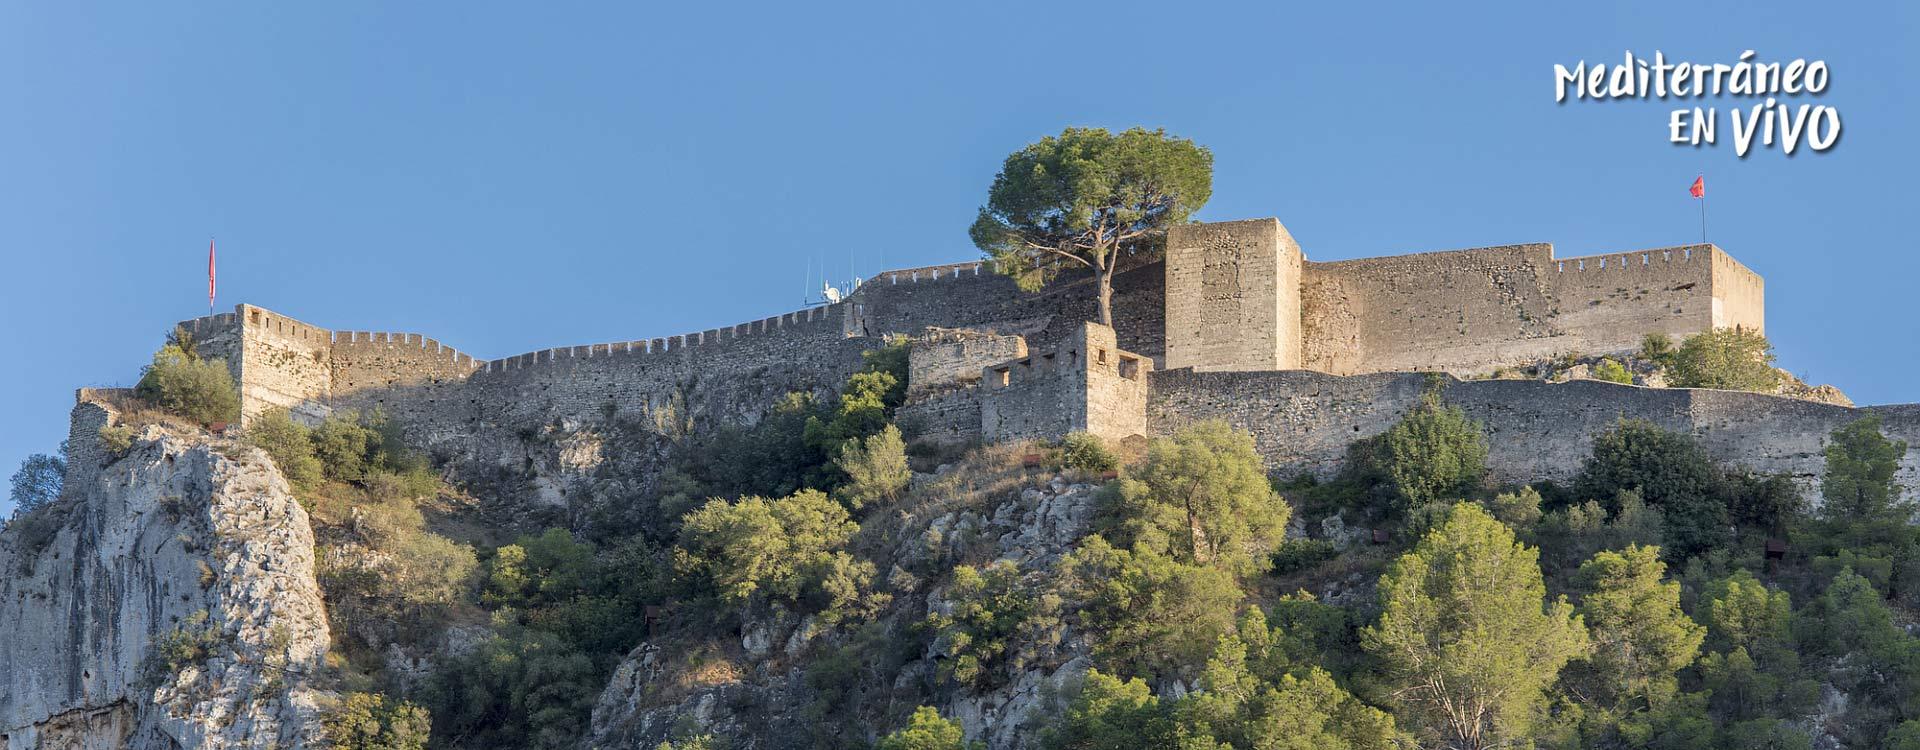  Image of the Castle of Xàtiva lit up at night 	